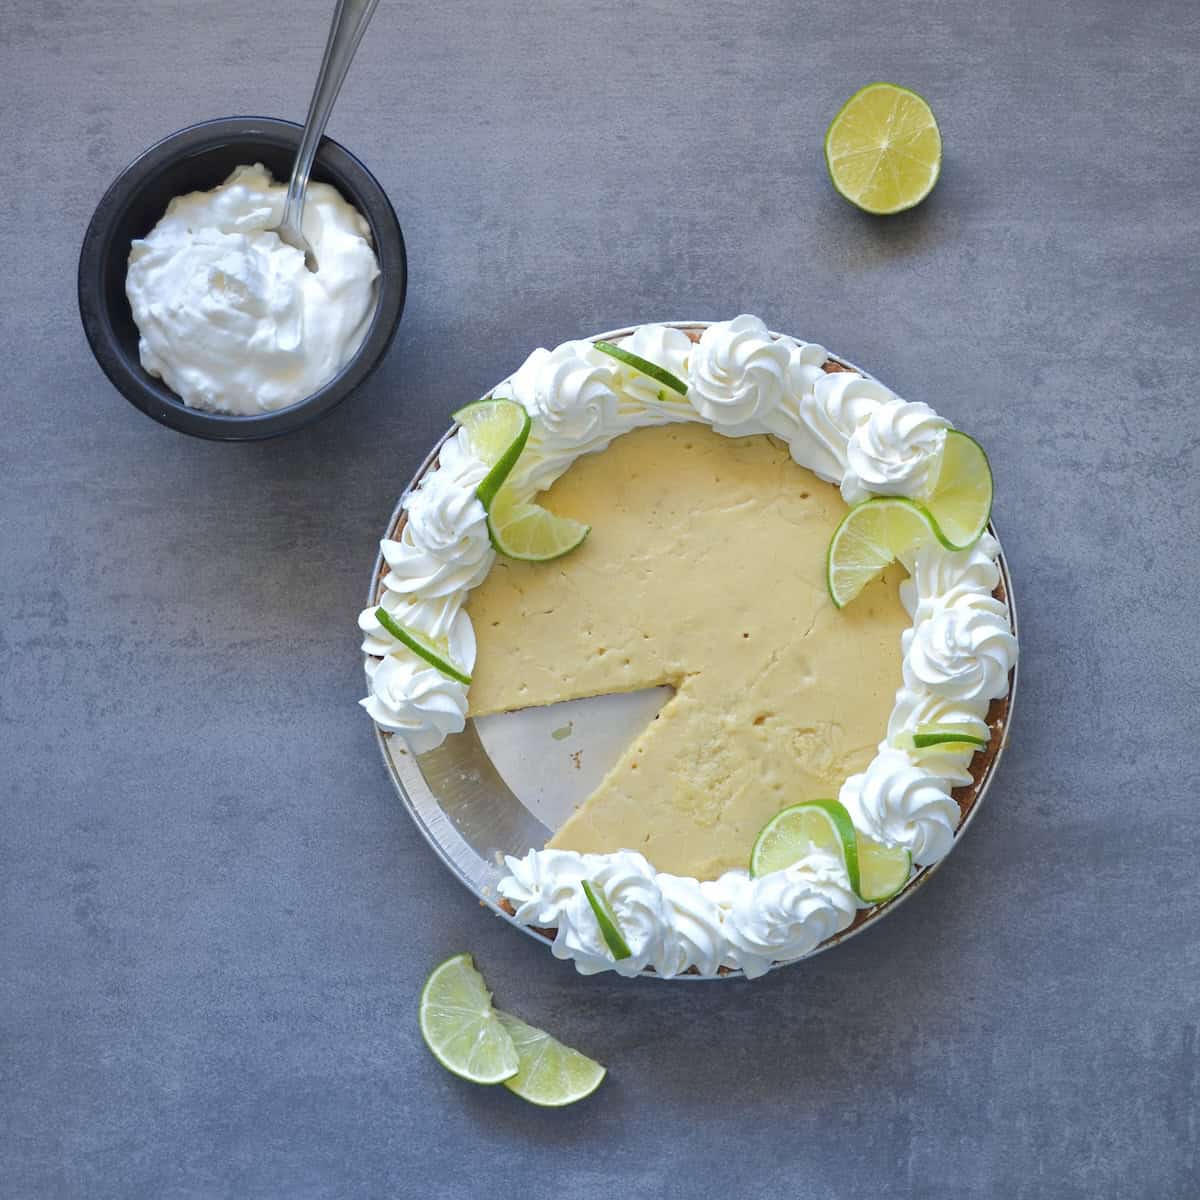 Decorated key lime pie